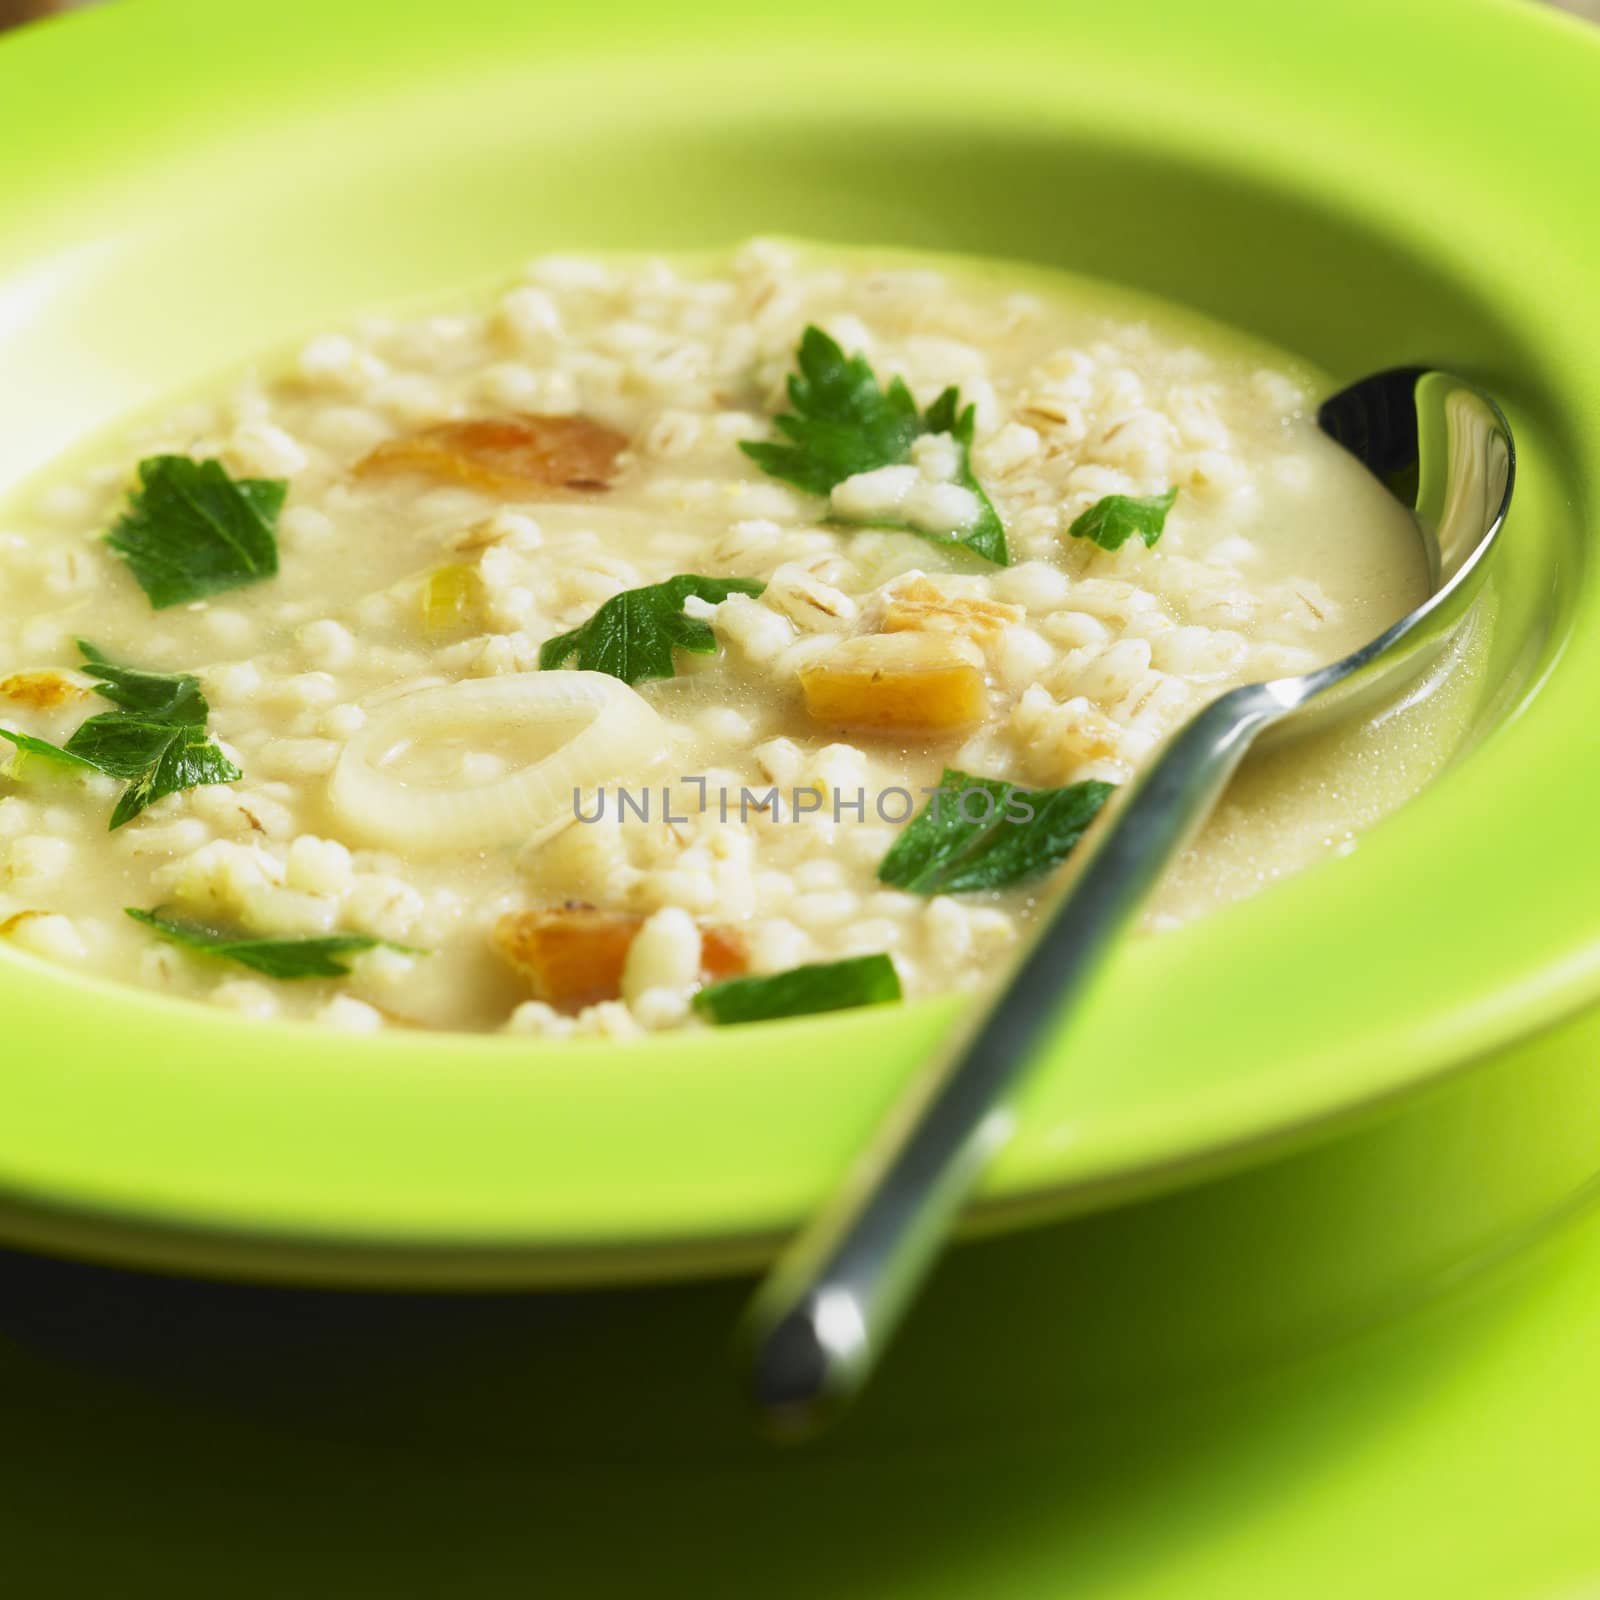 pot barley soup with pork meat pieces by phbcz